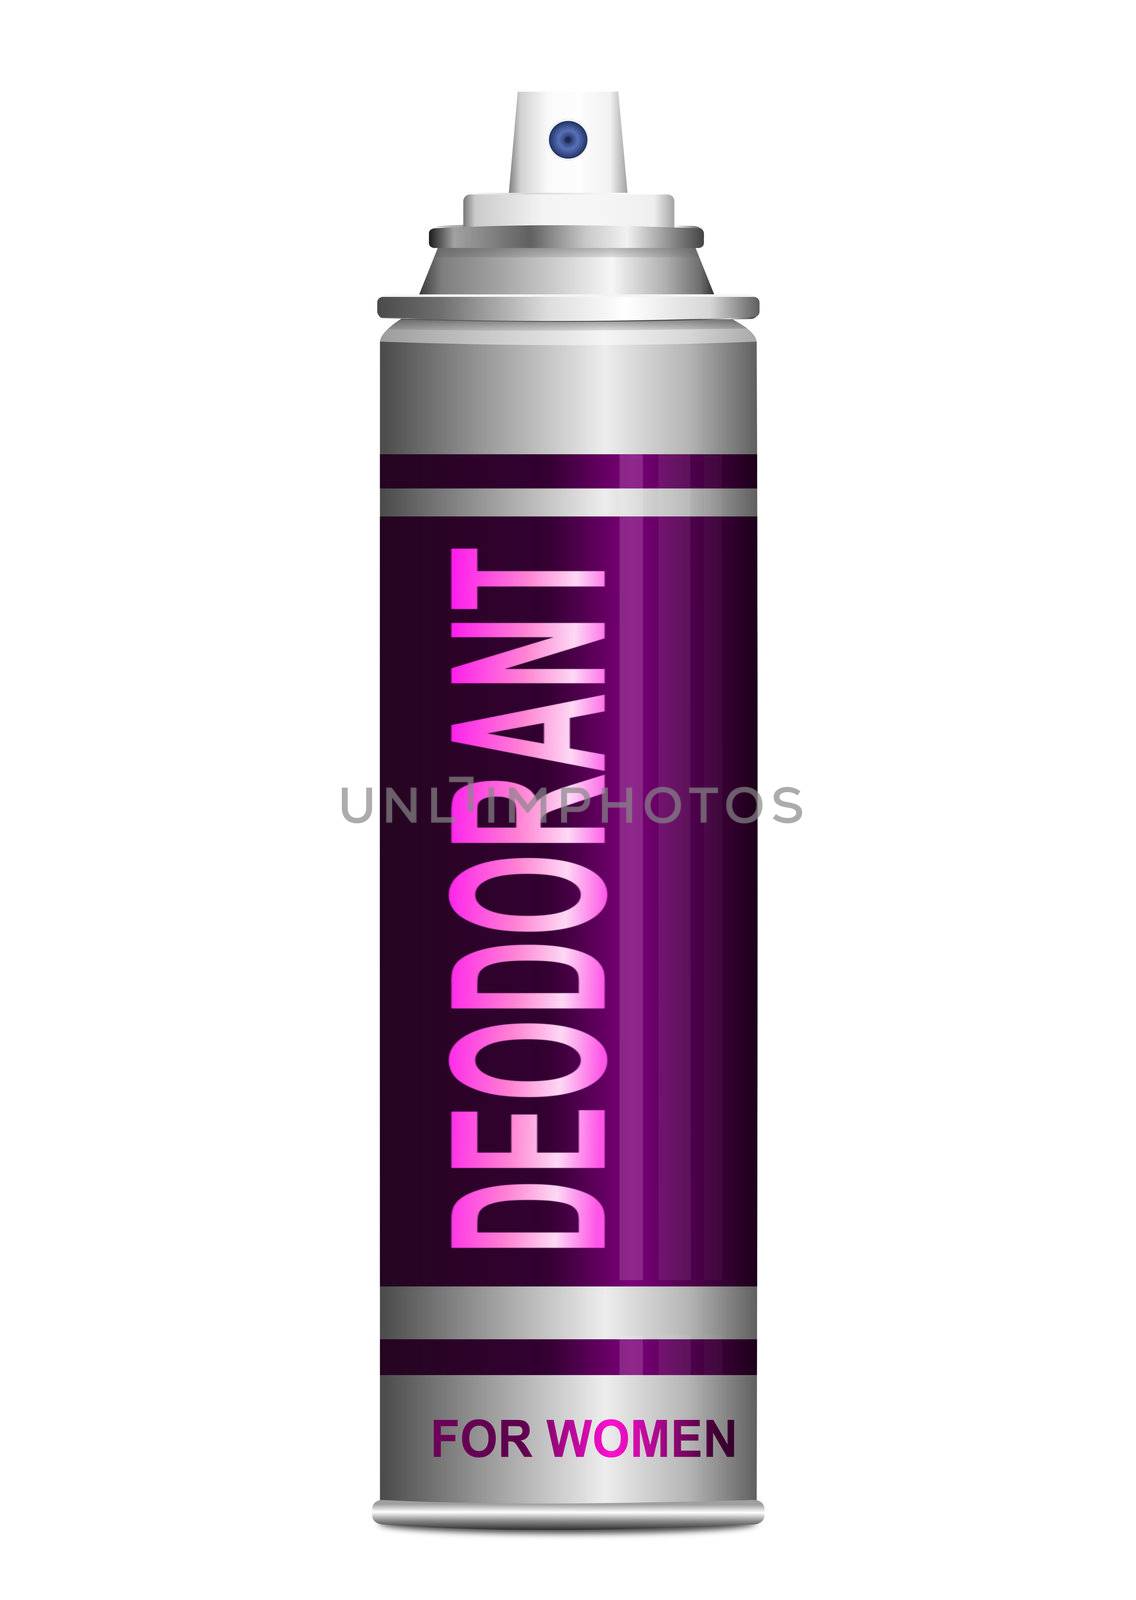 Illustration depicting a single deodorant spray can arranged over white.